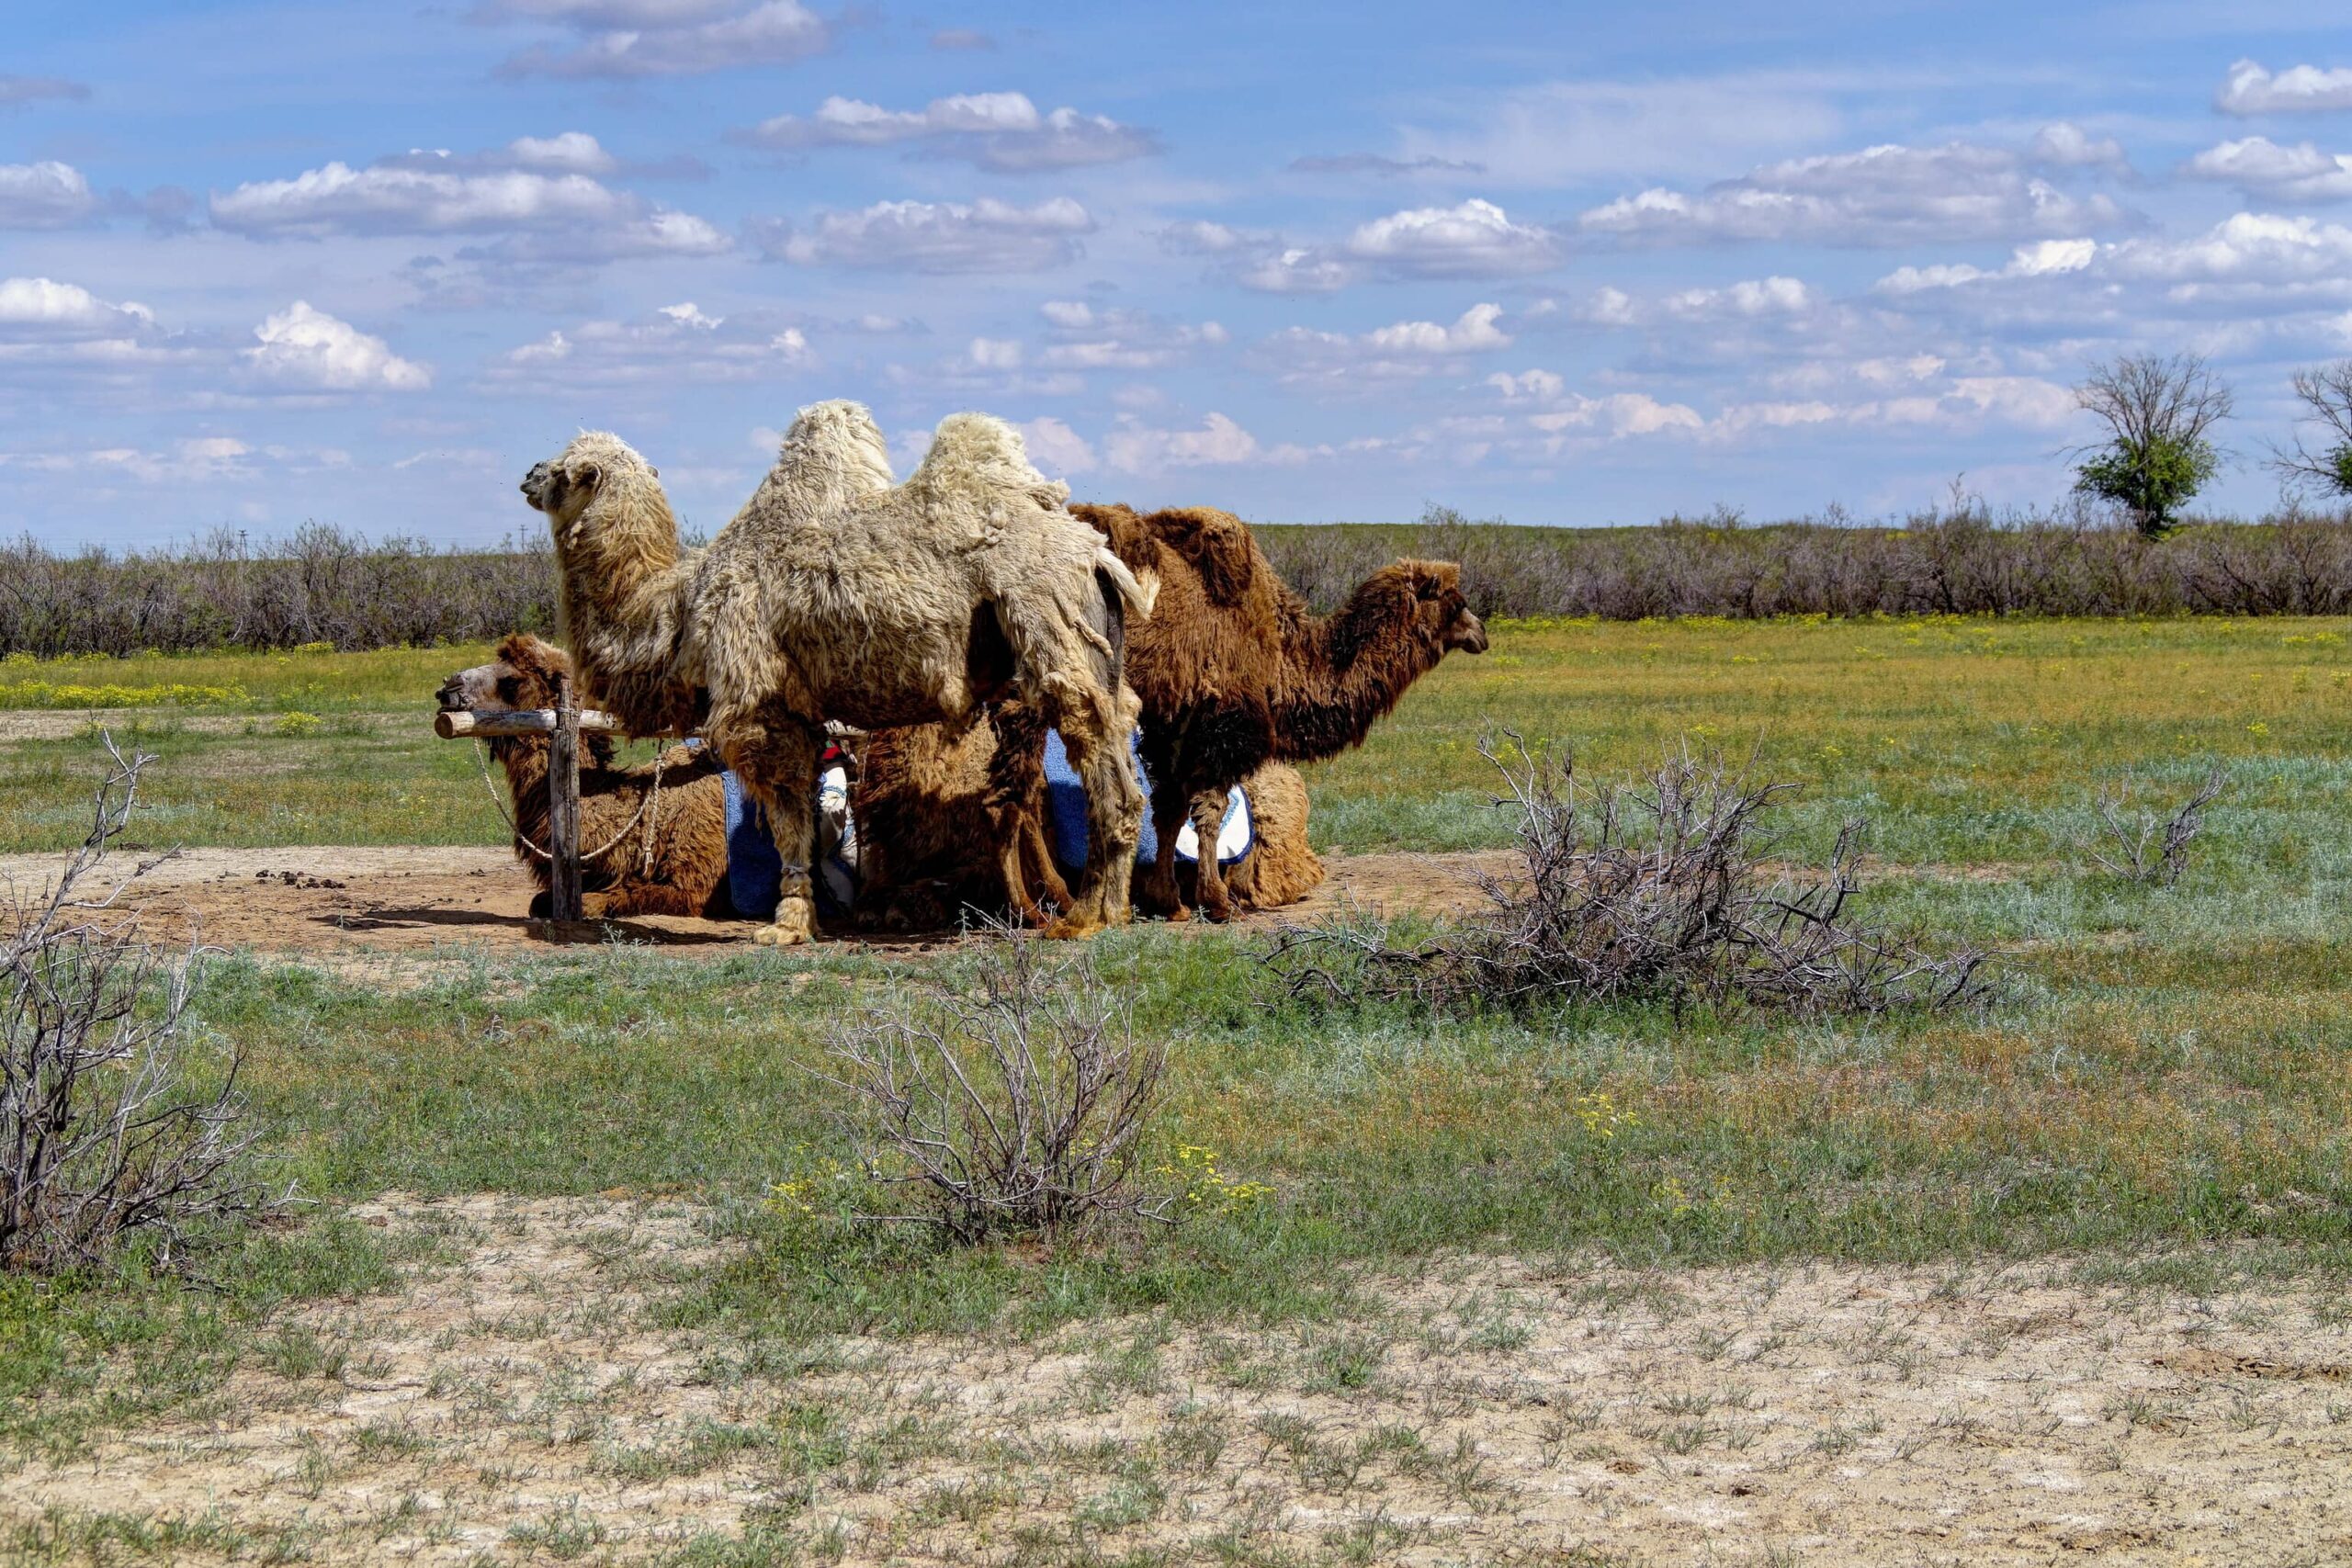 A group of camels in the field